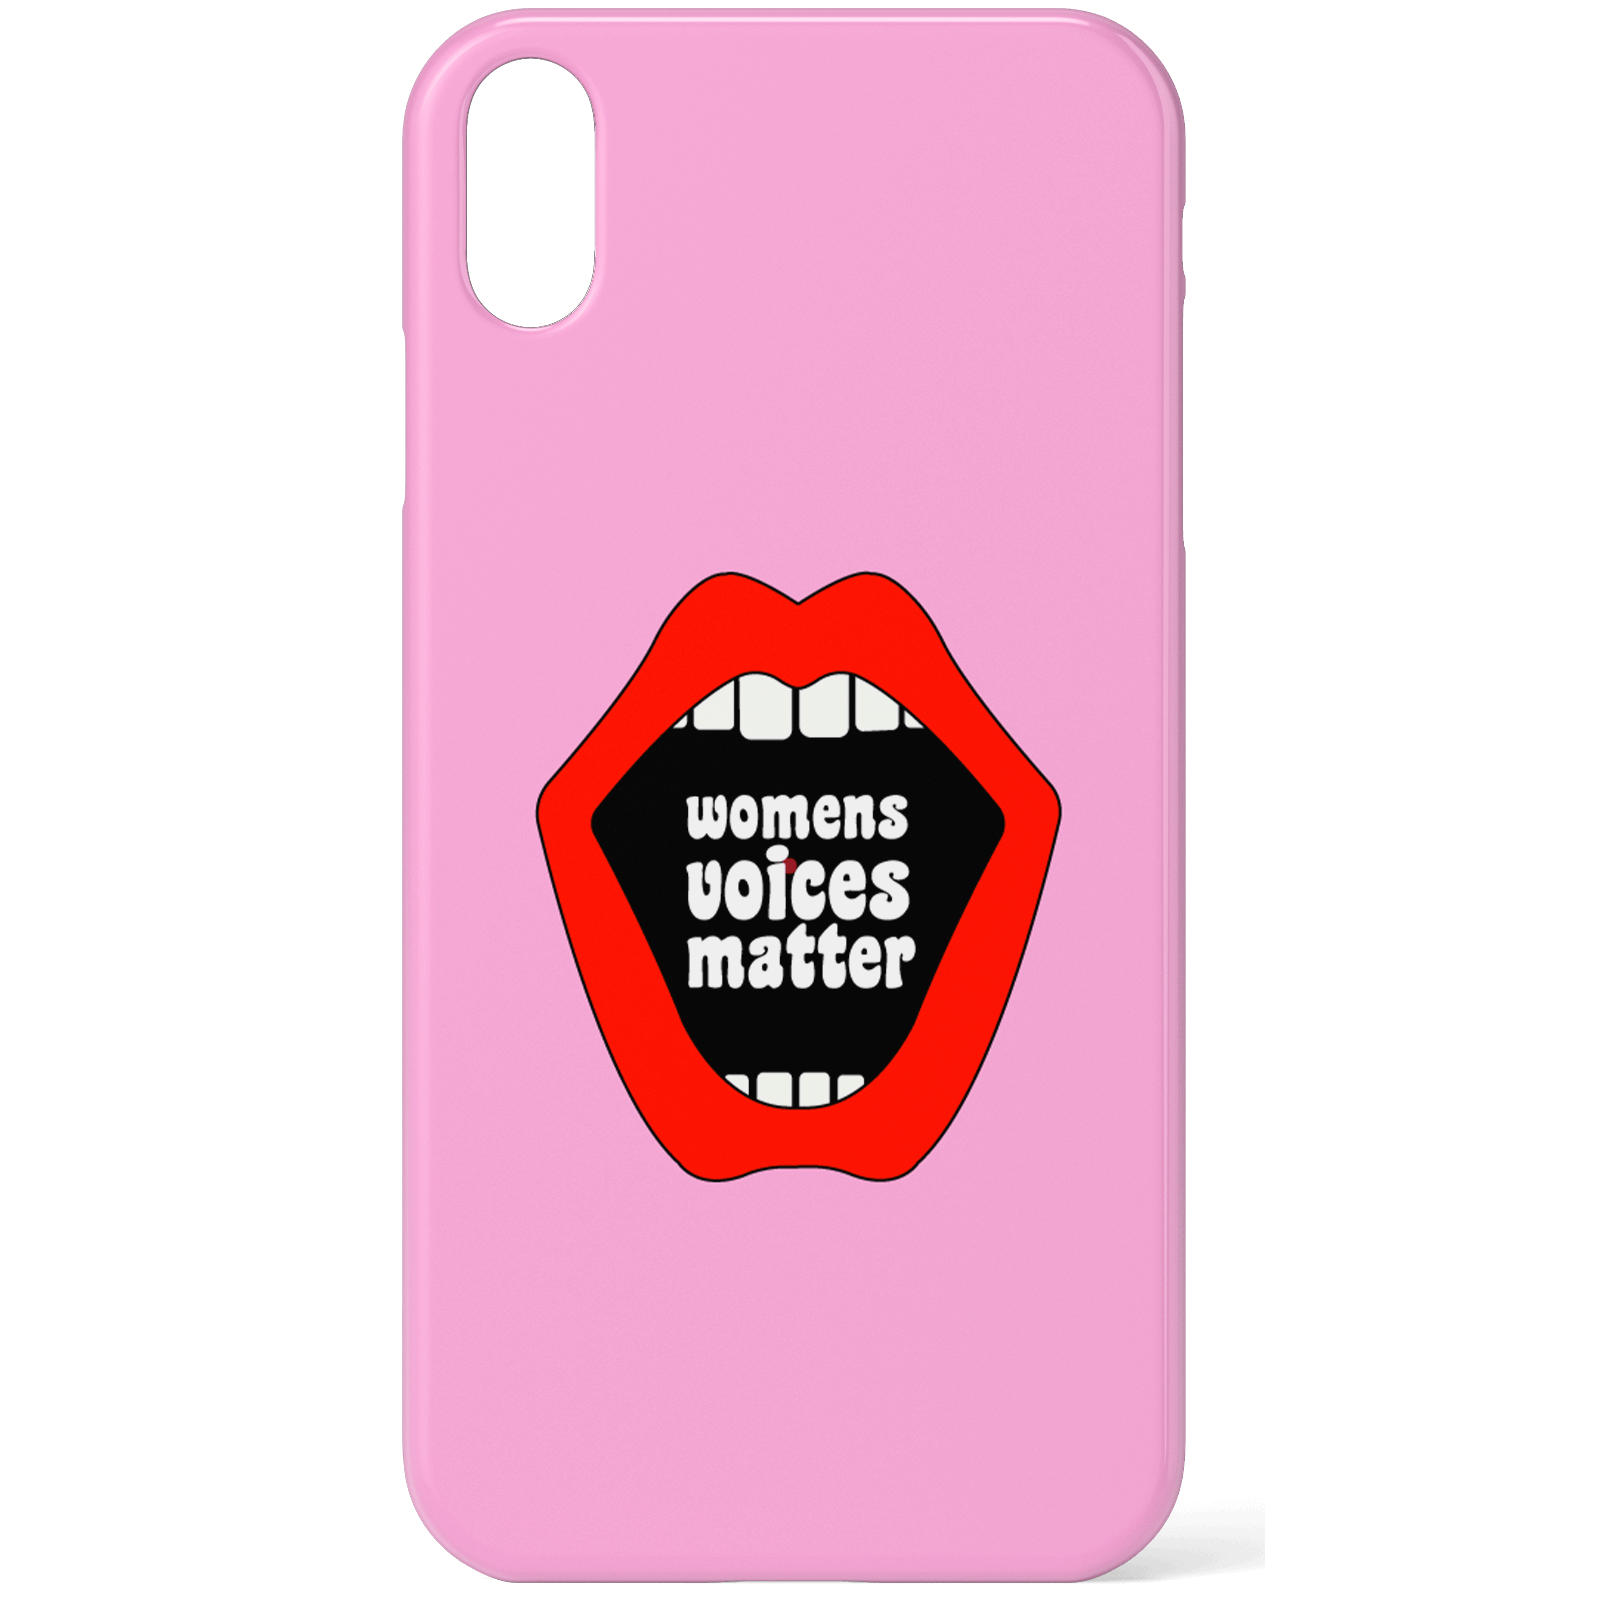 Feminist Womens Voices Matter Phone Case for iPhone and Android - Samsung S6 - Snap Case - Matte